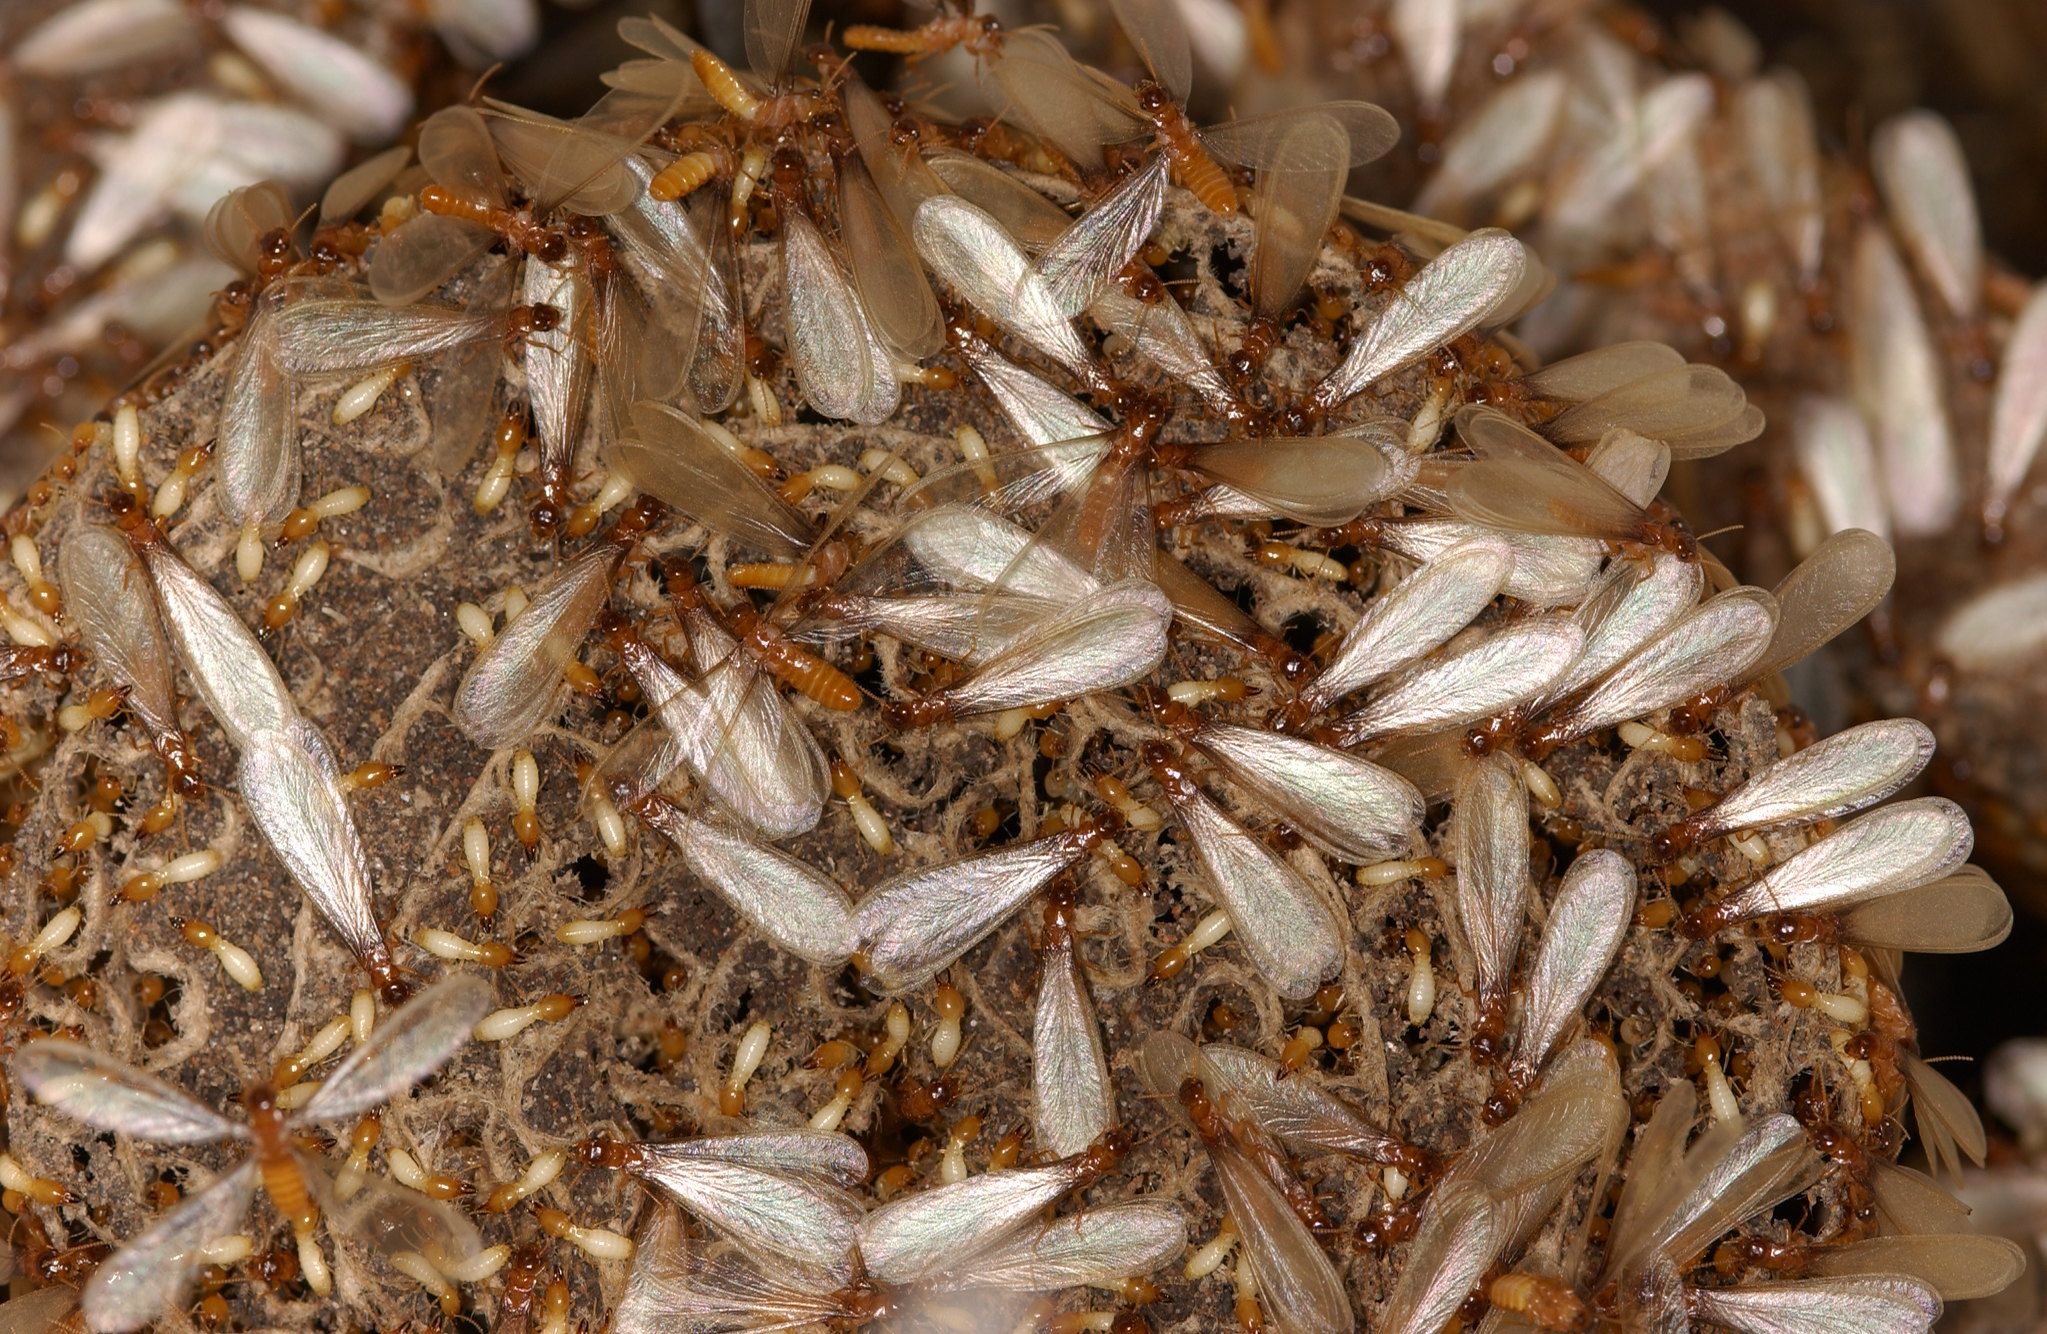 Photo shows hundreds of termites in a ball. The ones on the outside have wings.